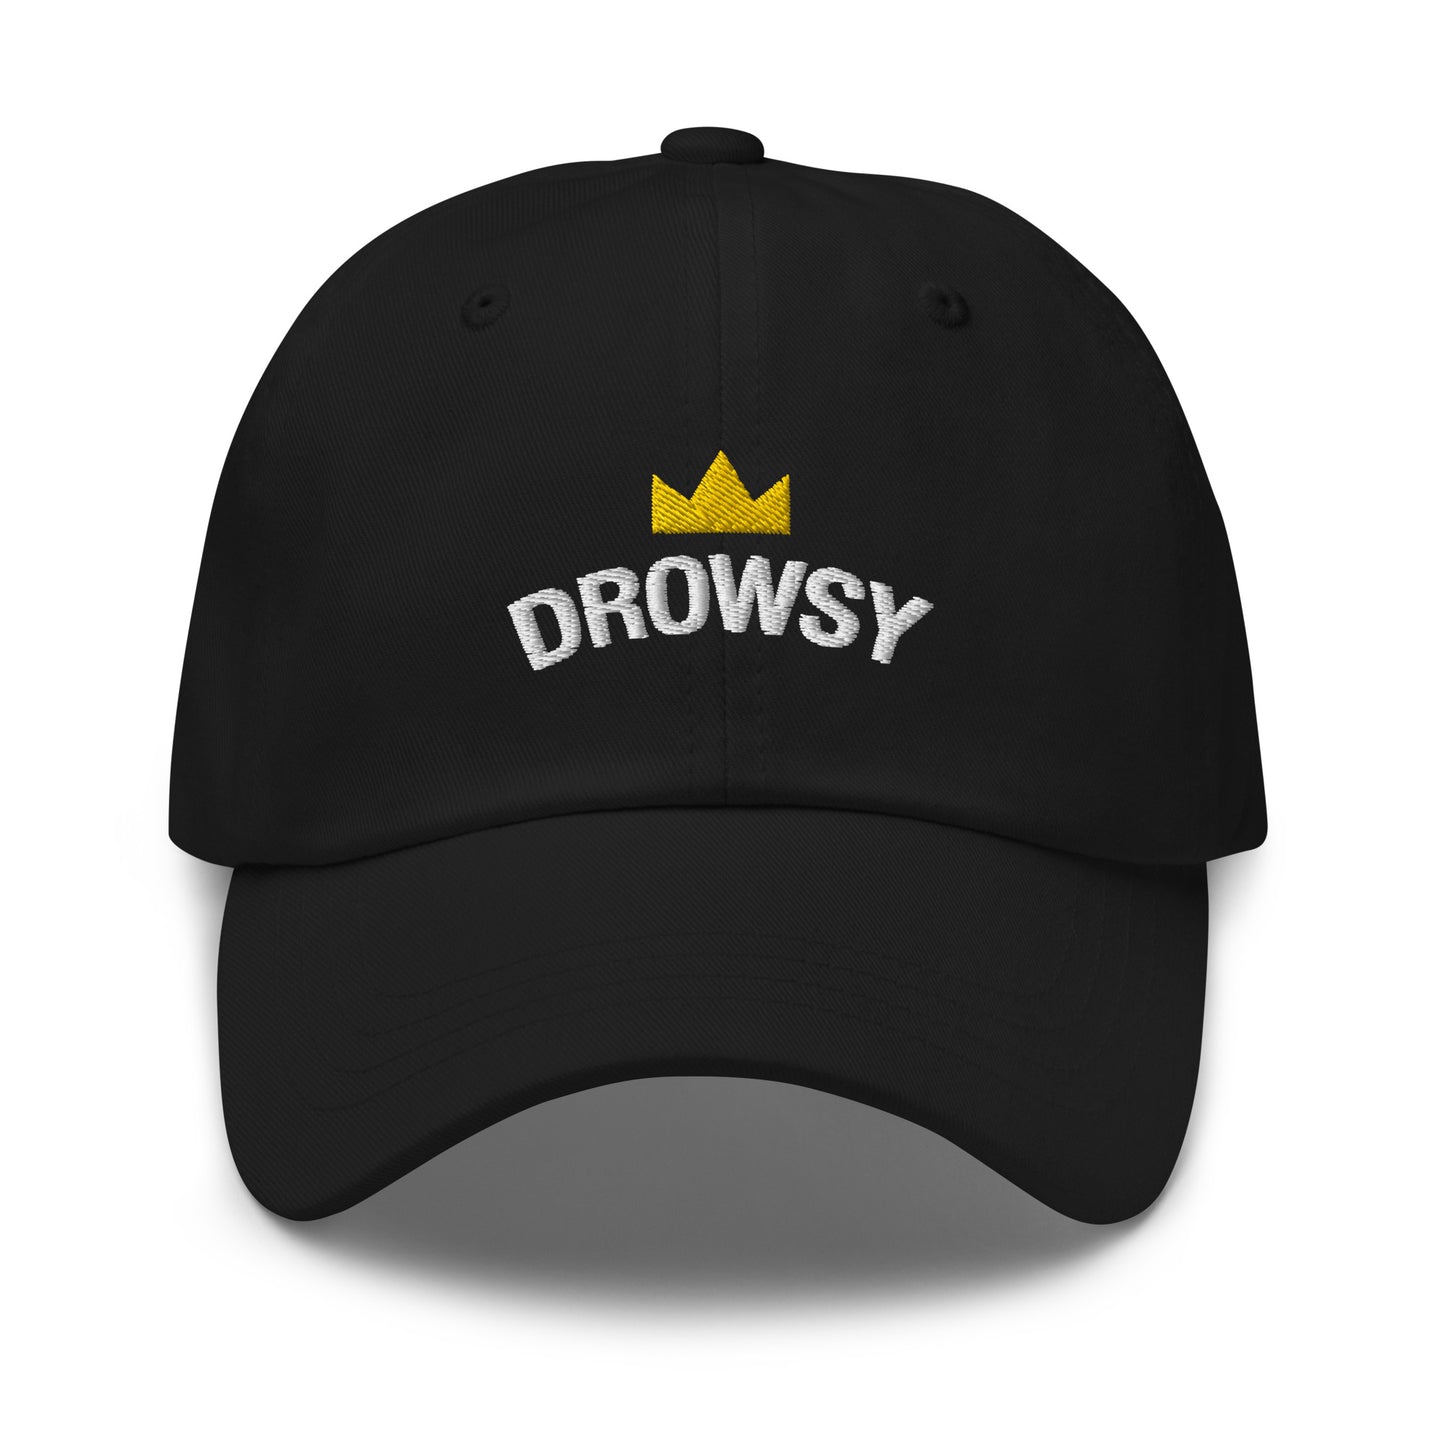 Embroidered Drowsy Cap